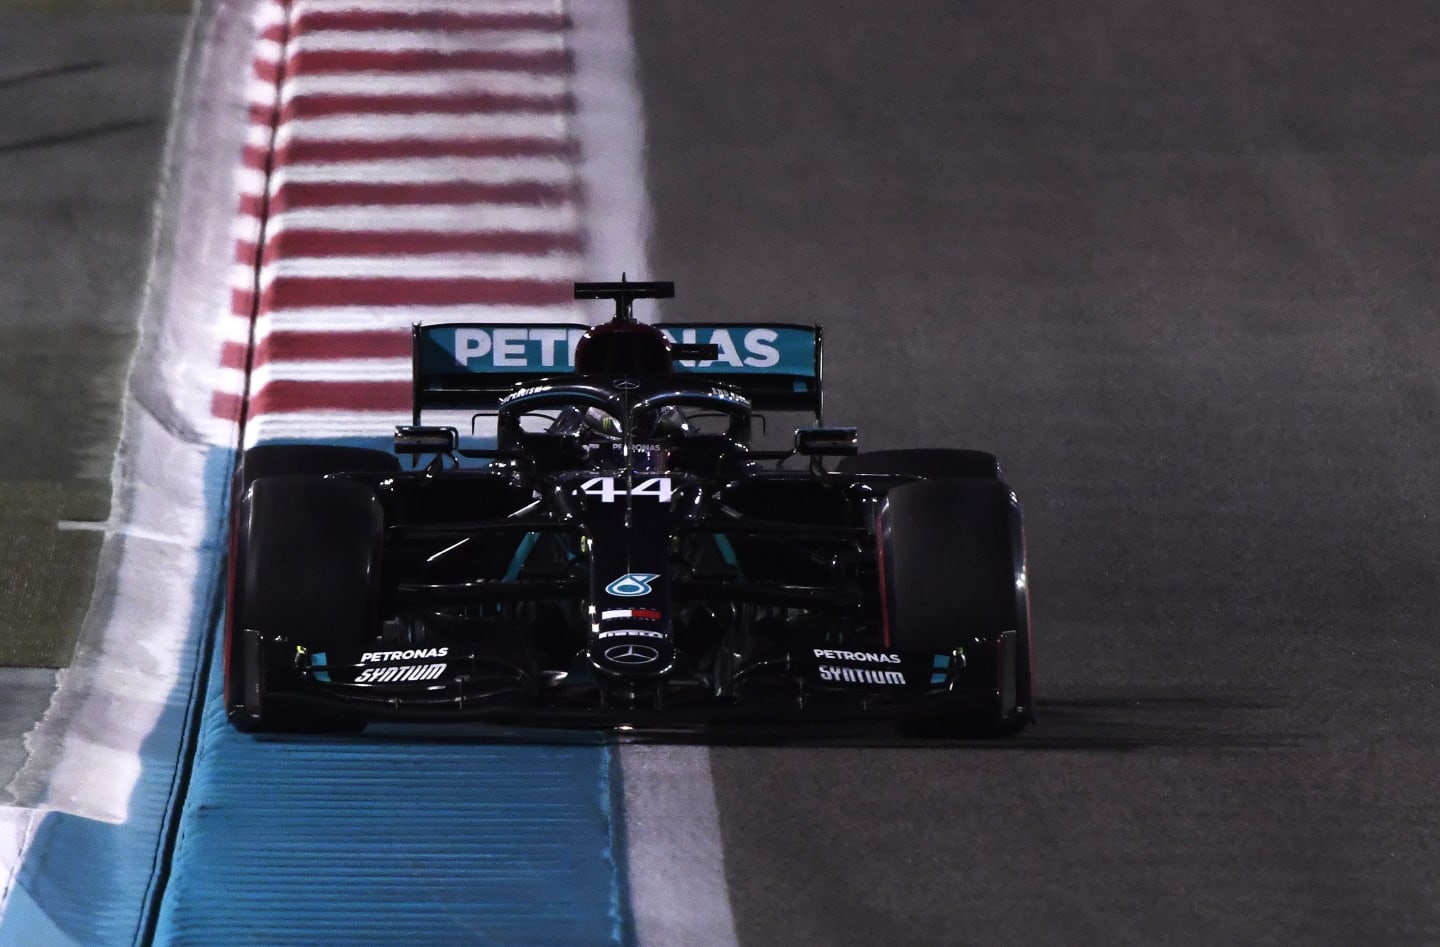 ABU DHABI, UNITED ARAB EMIRATES - DECEMBER 11: Lewis Hamilton of Great Britain driving the (44) Mercedes AMG Petronas F1 Team Mercedes W11 on track during practice ahead of the F1 Grand Prix of Abu Dhabi at Yas Marina Circuit on December 11, 2020 in Abu Dhabi, United Arab Emirates. (Photo by Rudy Carezzevoli/Getty Images)